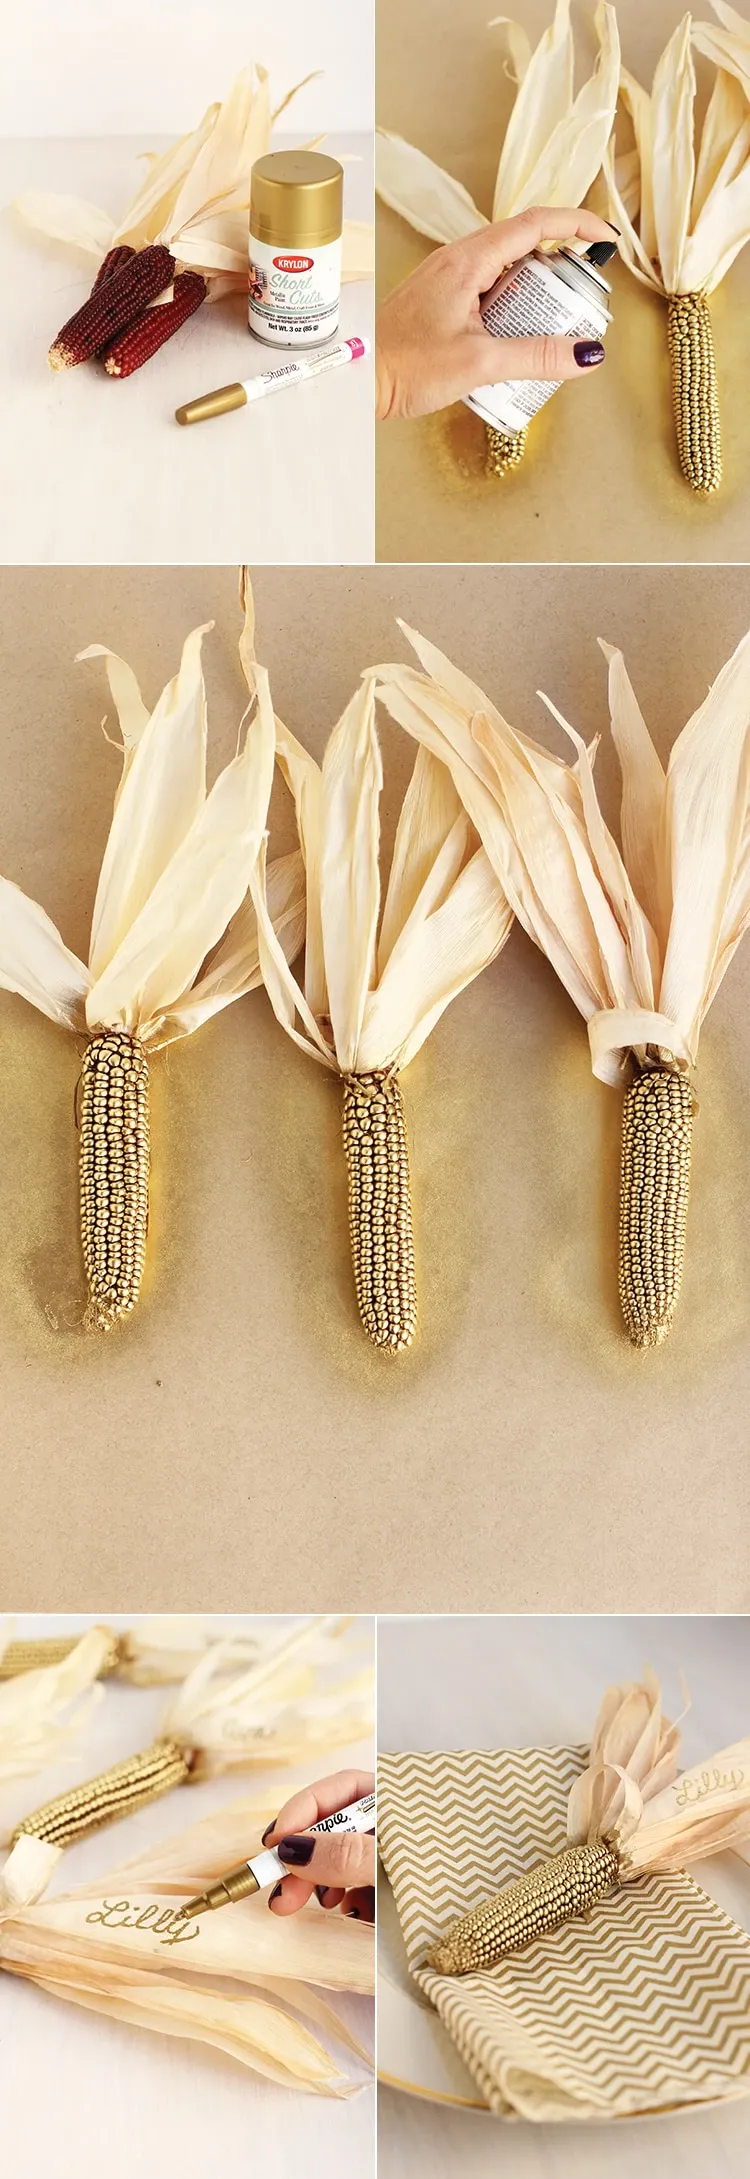 How to make Thanksgiving Gold Corn Place Card Holders Tutorial